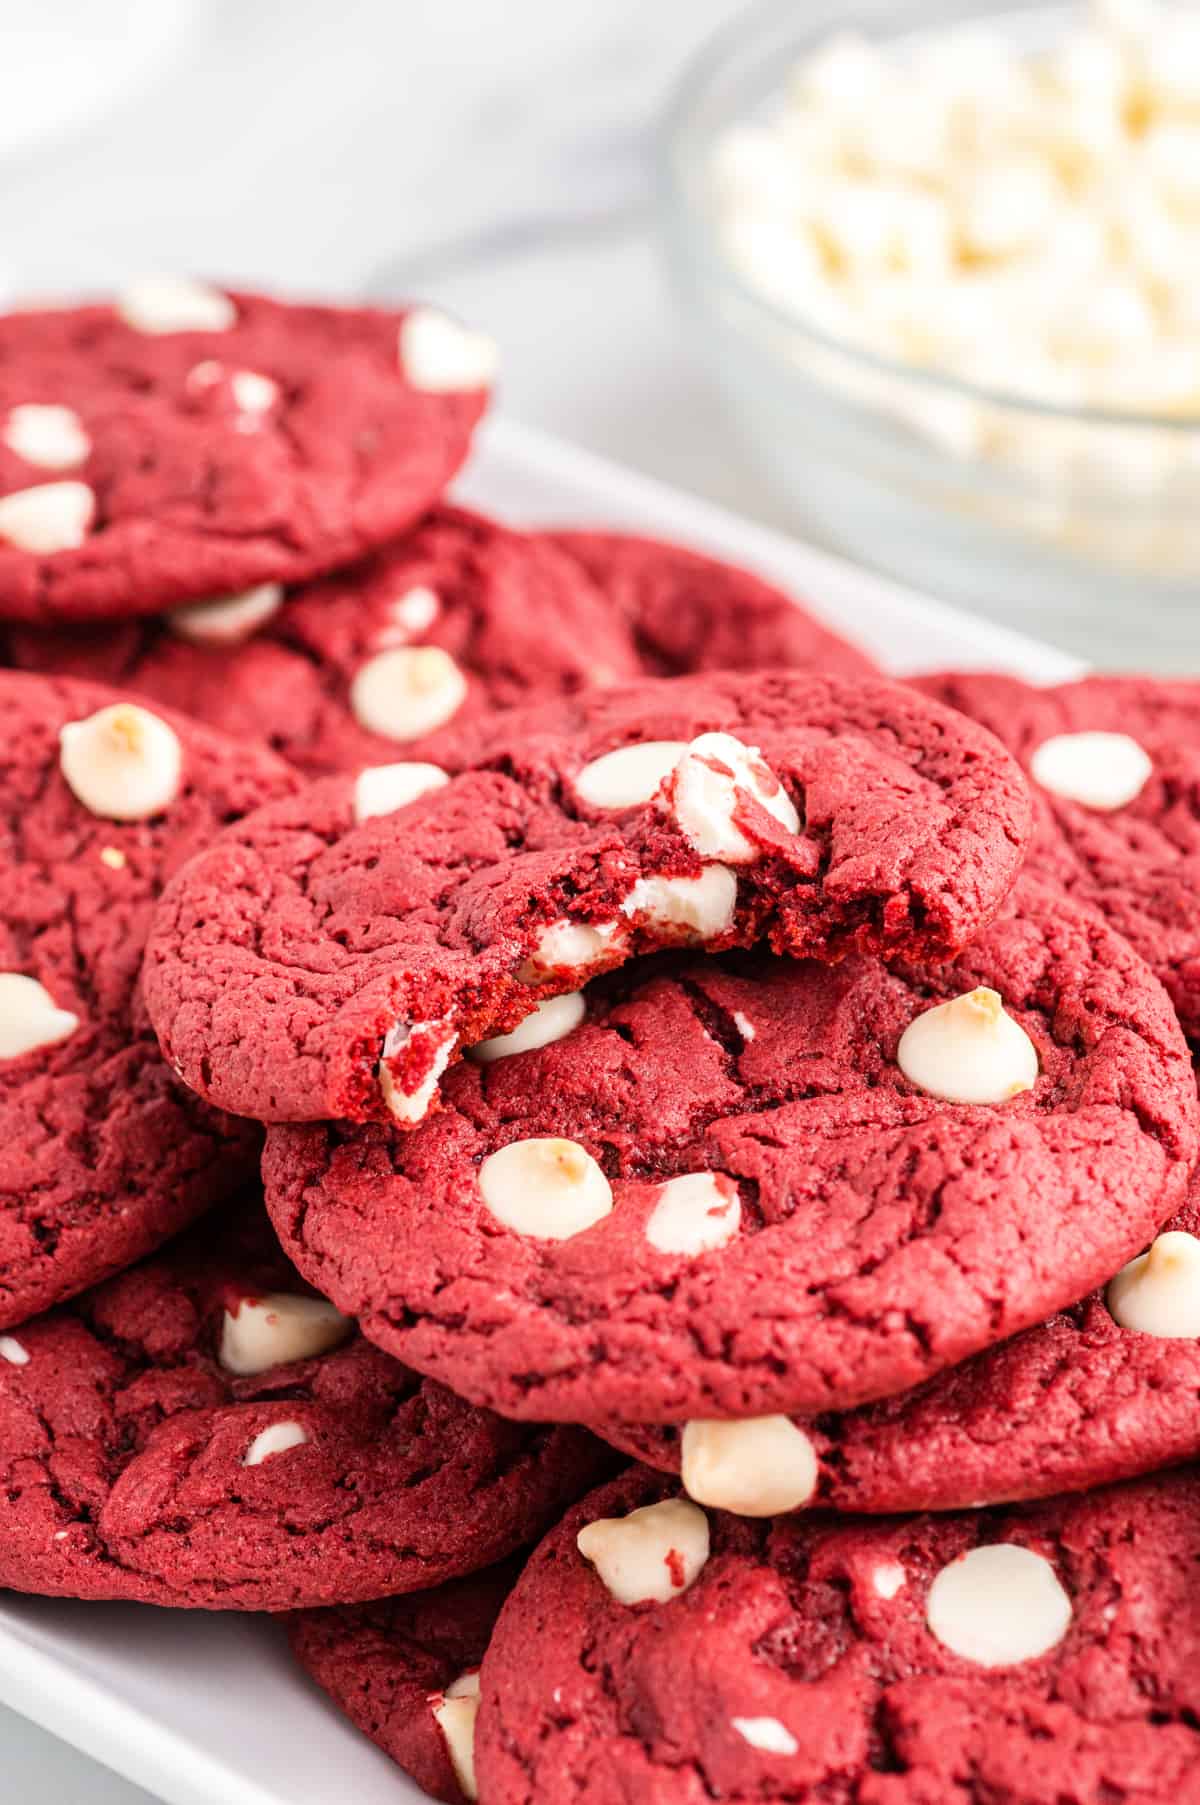 Red velvet cookies with white chocolate chips on white plate. Top cookie has bite taken out of it to show soft and chewy texture. A bowl of white chocolate chips in the background